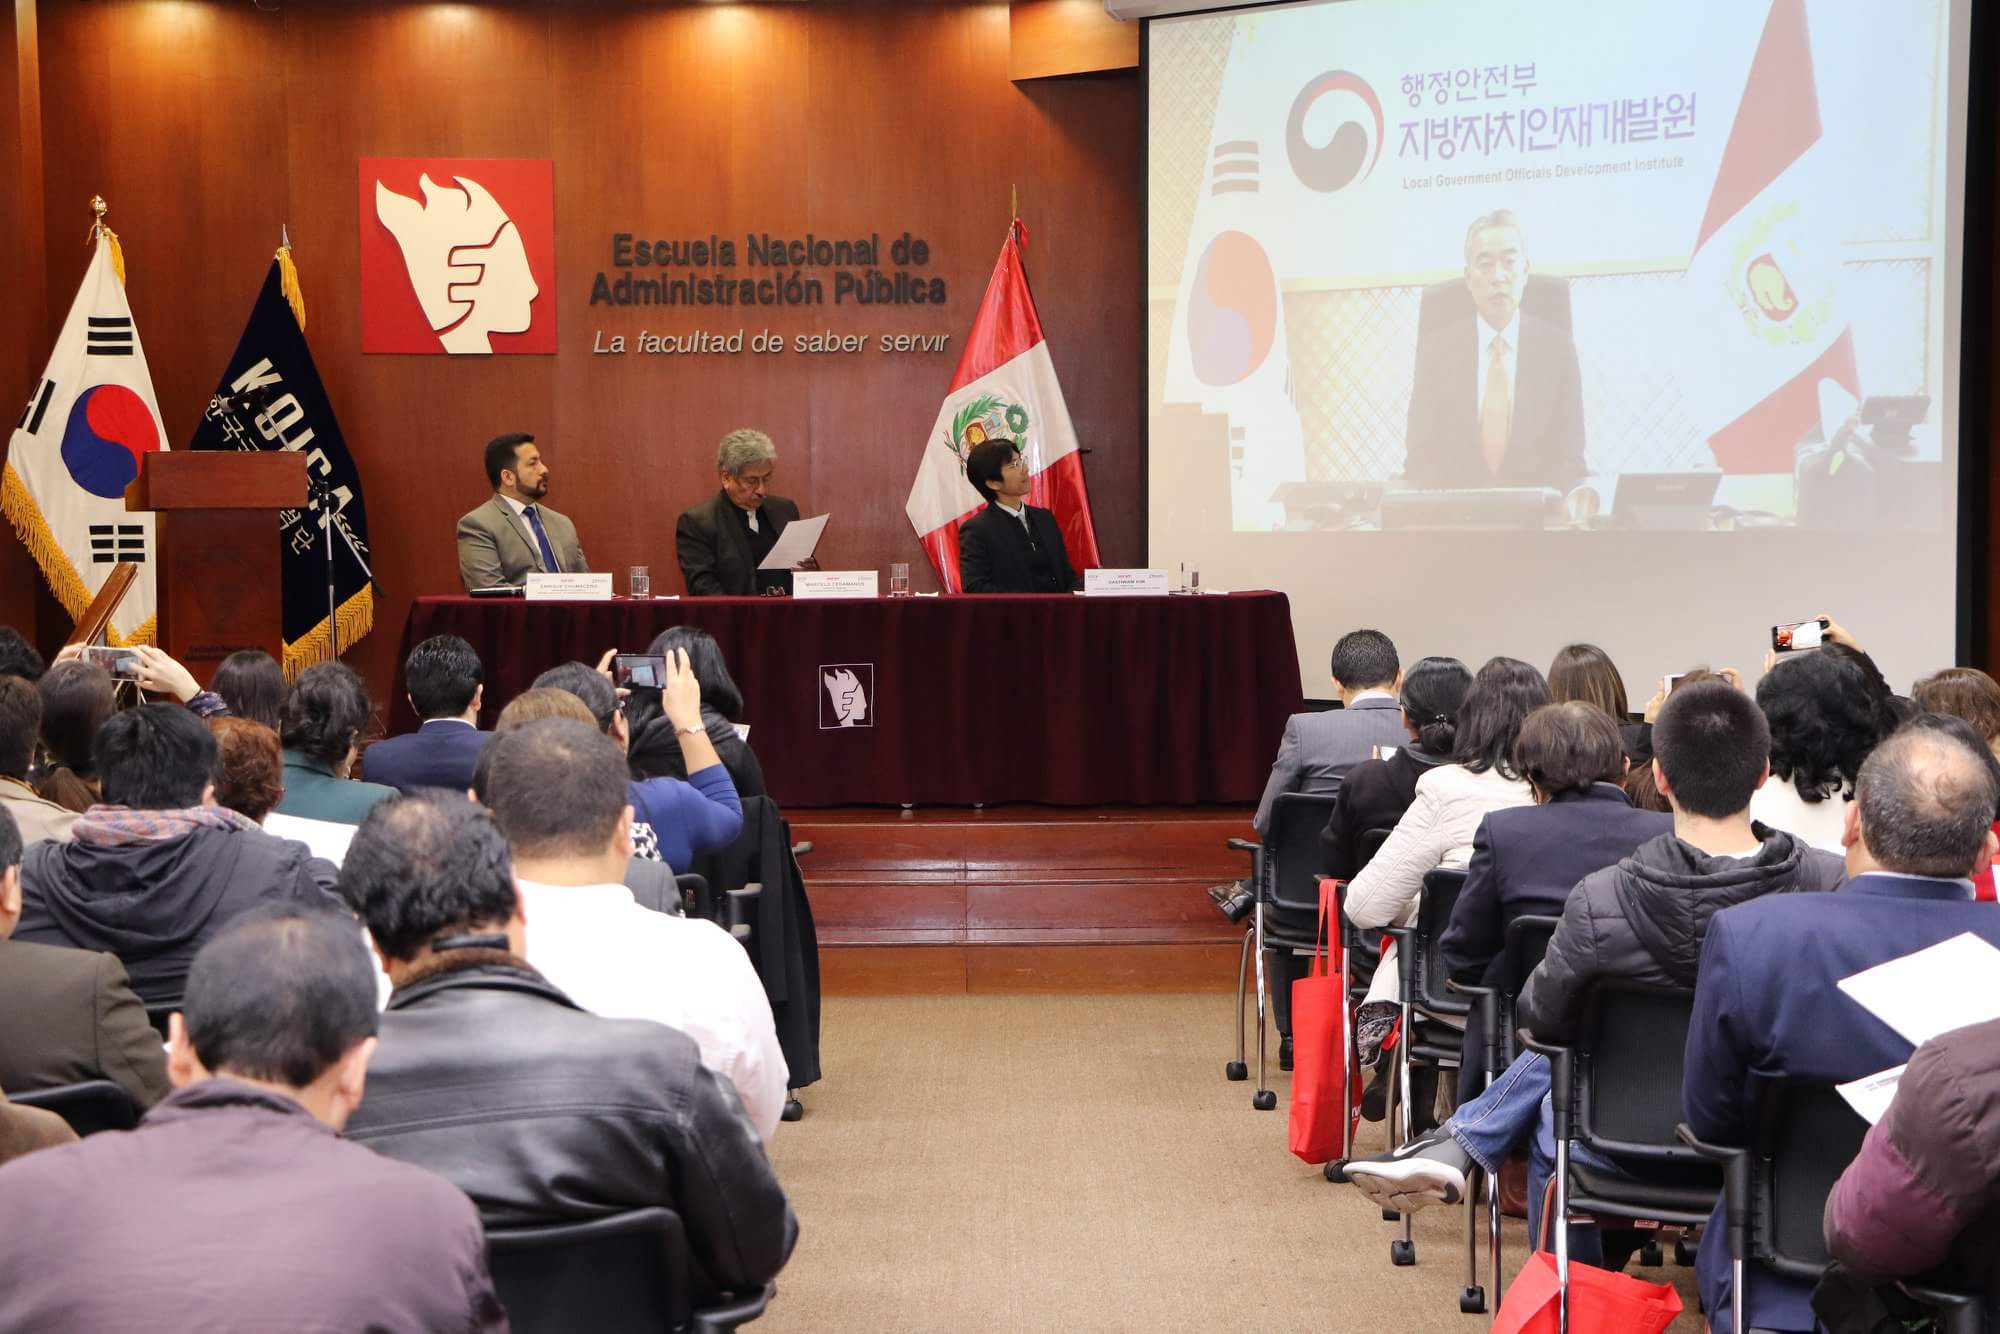 Huanuco carries out second workshop to share experience with LOGODI 큰 이미지[마우스 클릭 시 창닫기]